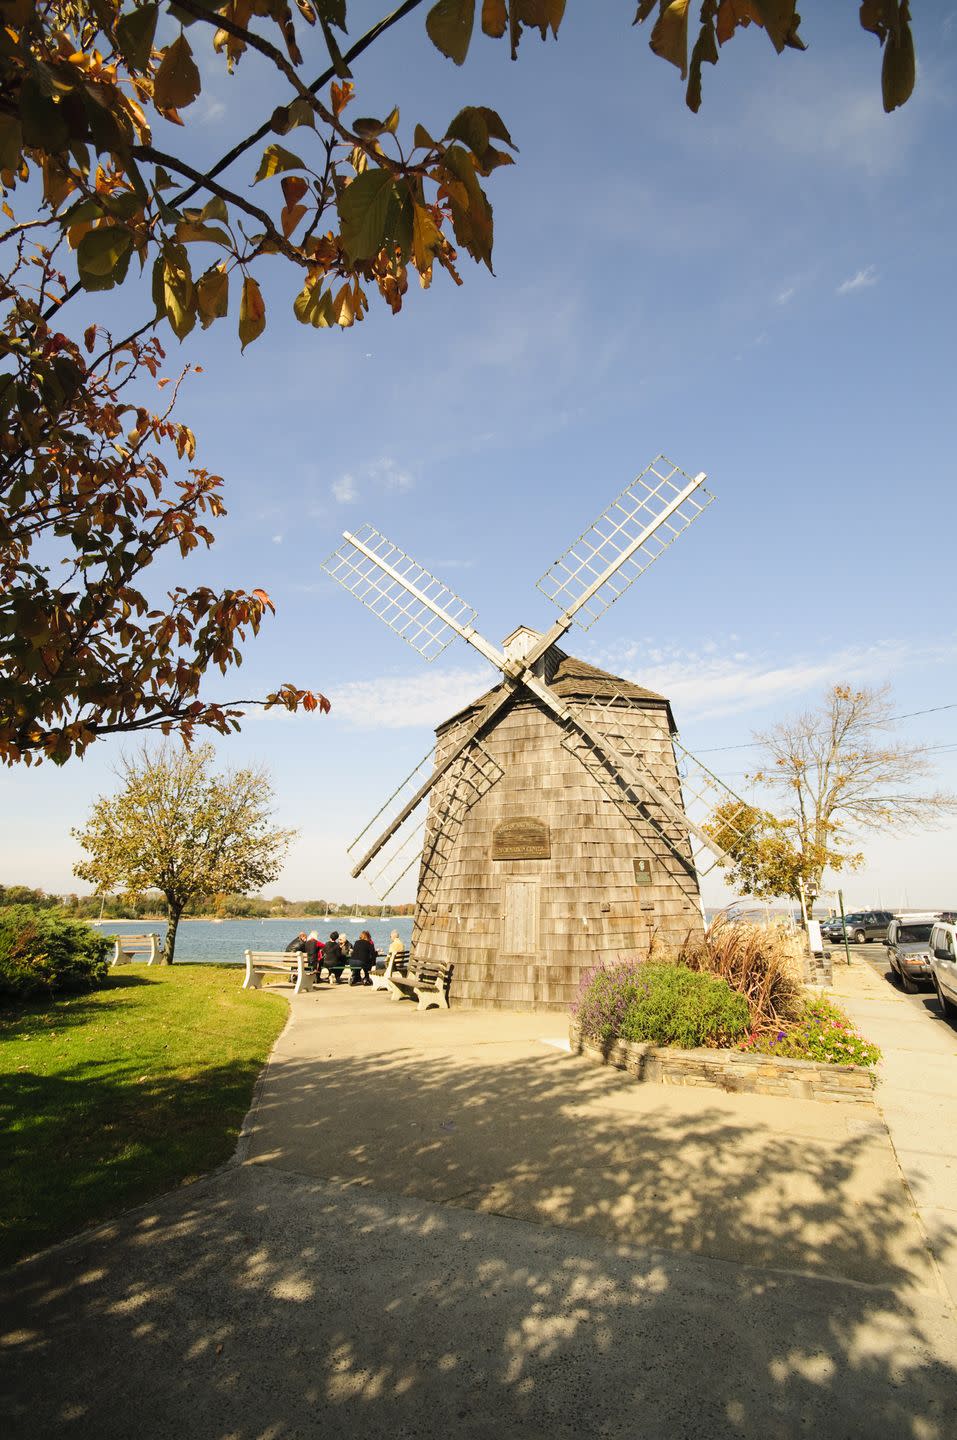 model of beebe windmill, sag harbor, the hamptons, long island, new york state, united states of america, north america